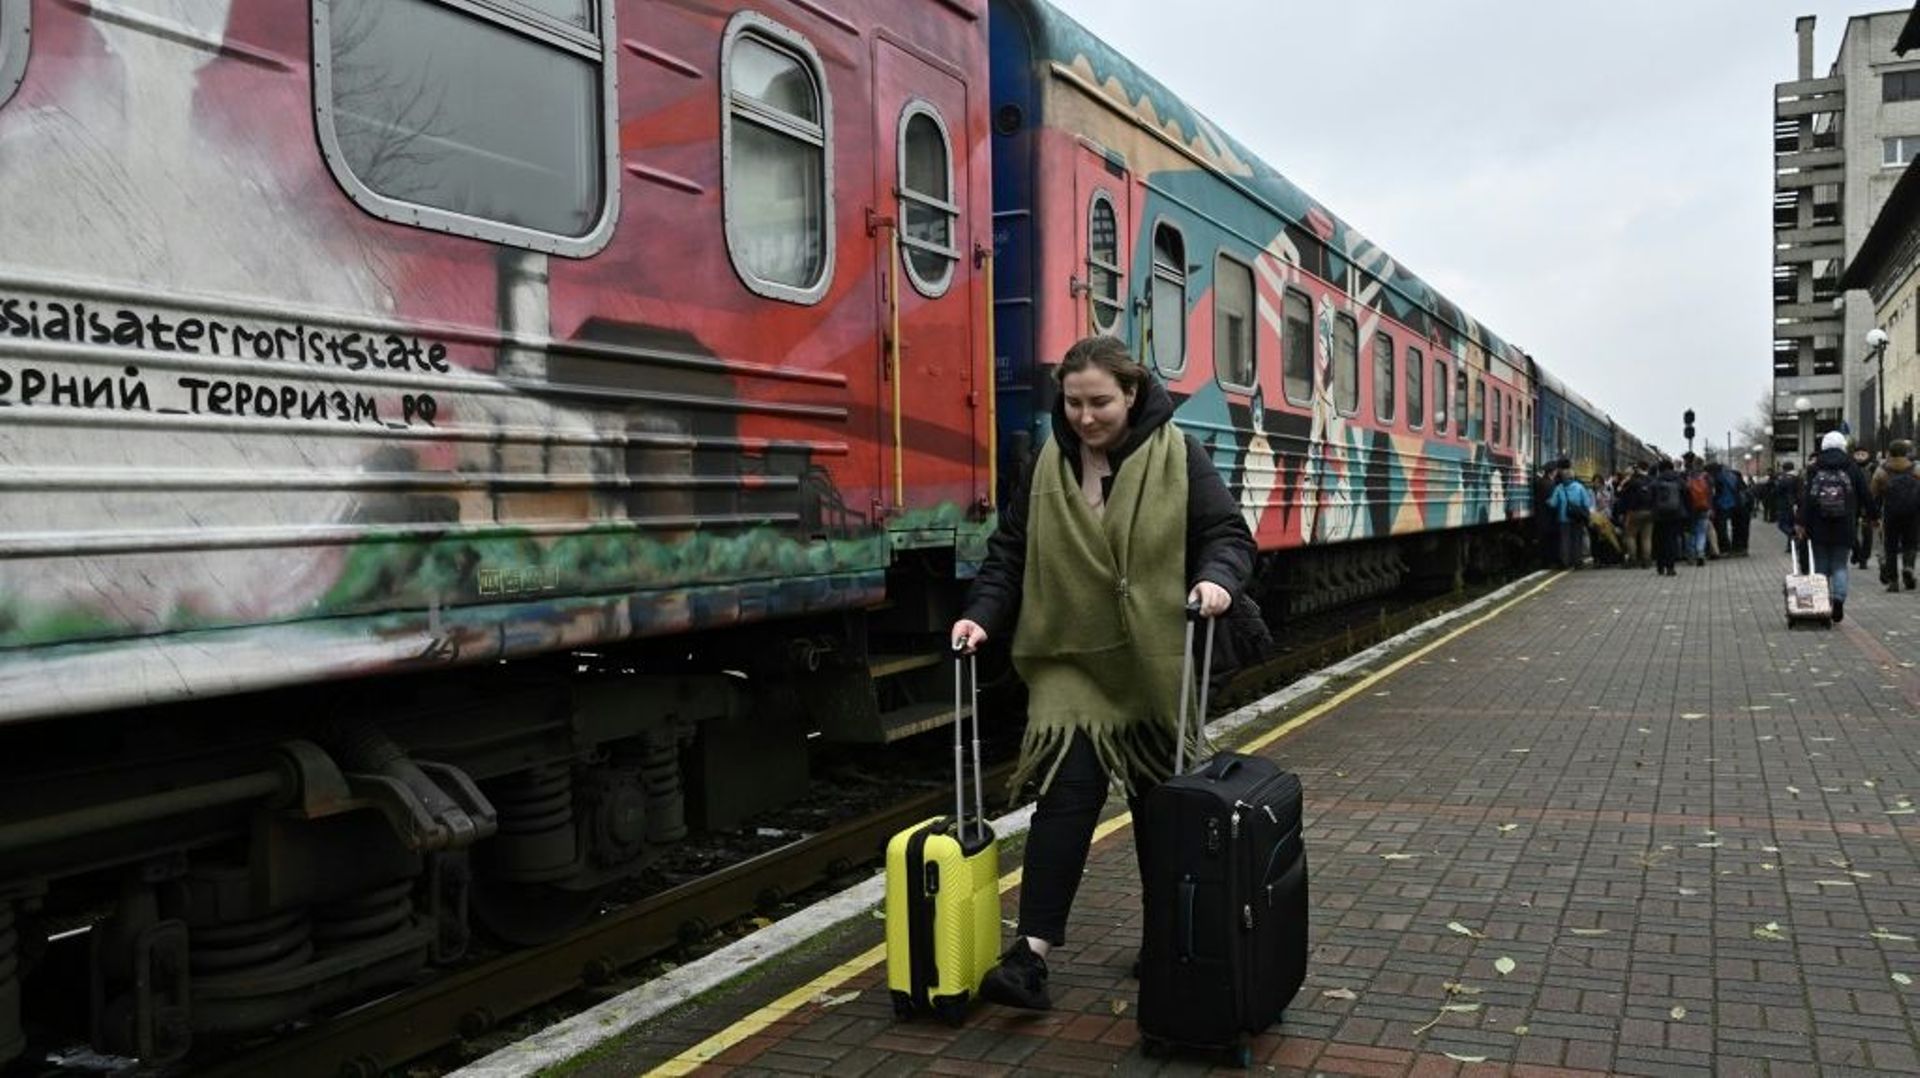 The first train from Kyiv to Kherson since the Russian invasion of Ukraine arrived at the Kherson train station on November 19, 2022